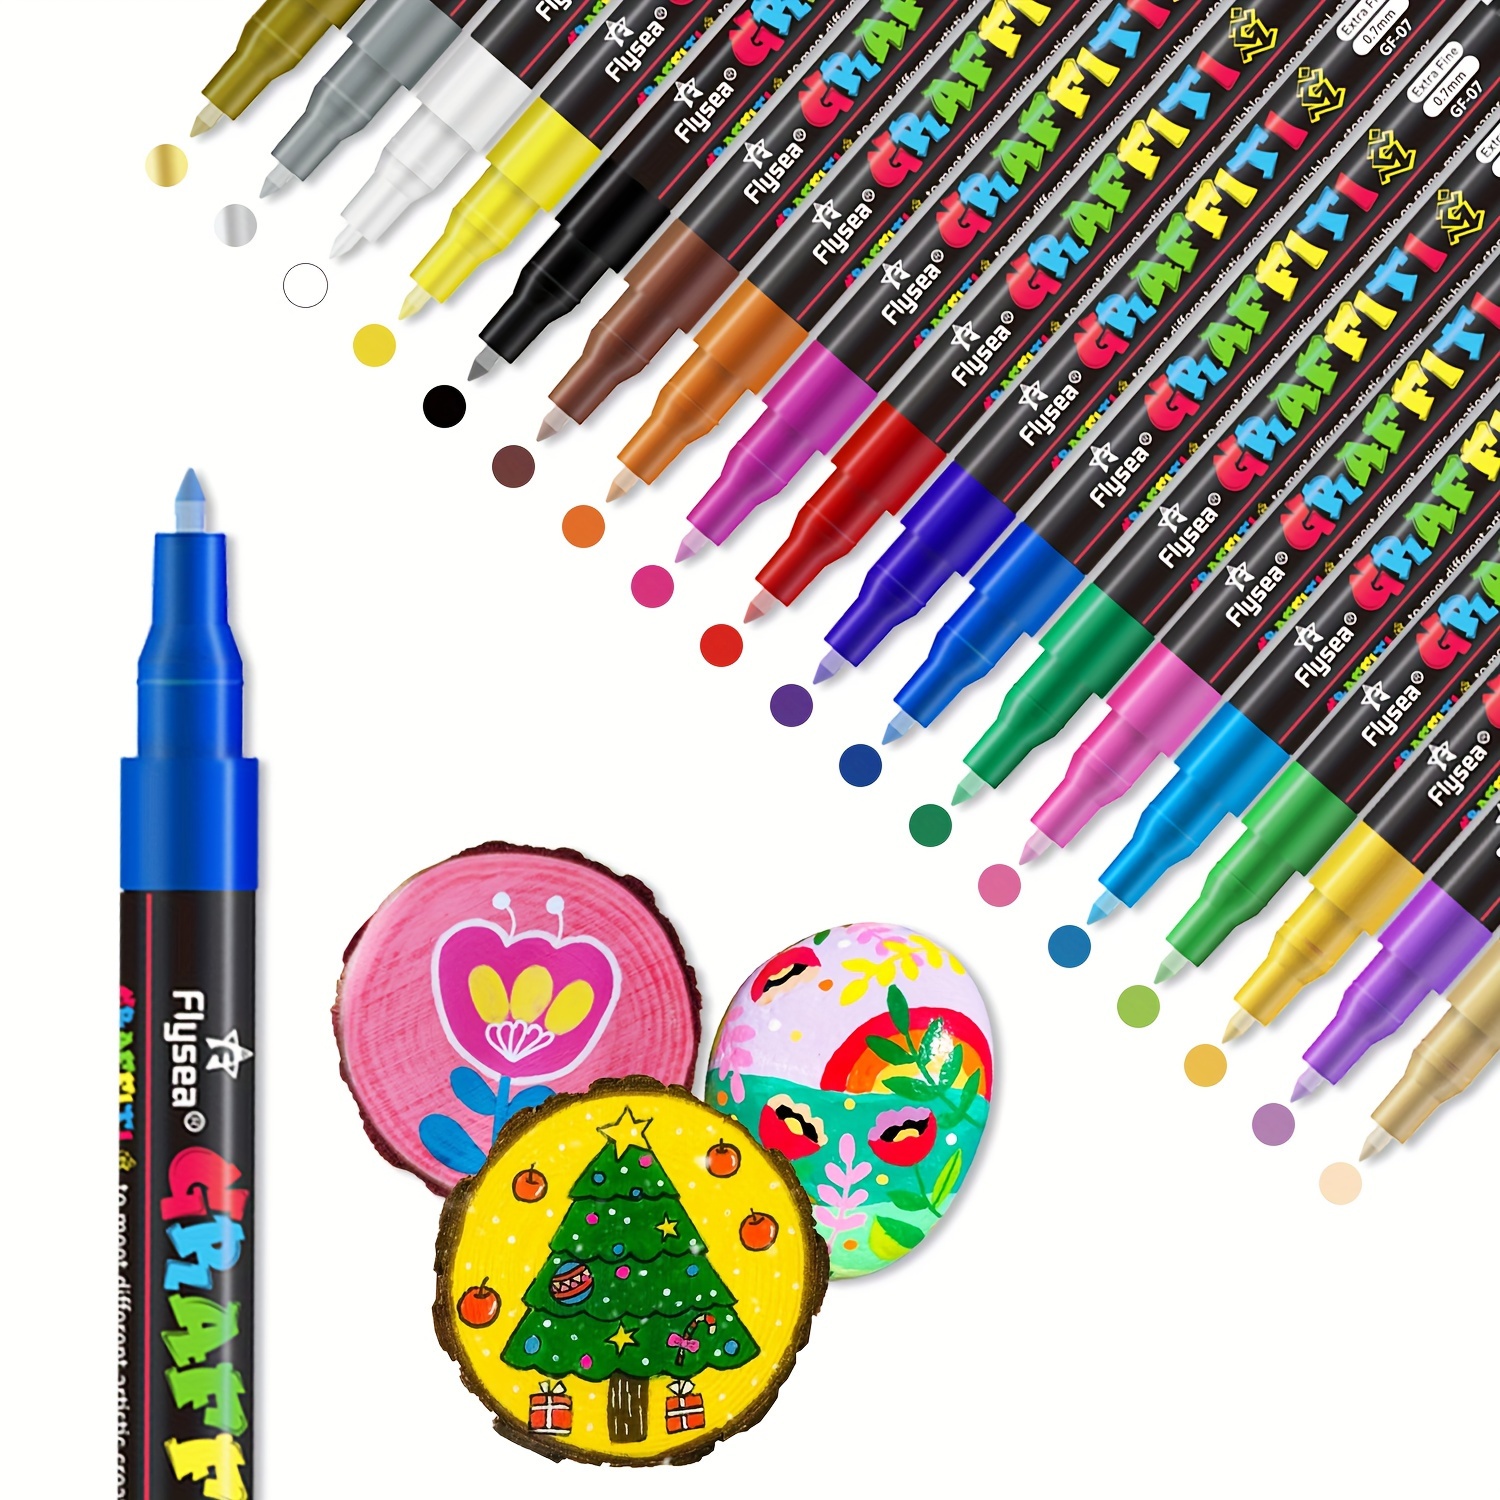  12 Acrylic Paint Pens for Rock Painting 0.7mm Extra Fine Tip  Paint Markers, Premium Acrylic Paint Pens for Mug, Ceramic, Metal, Glass,  Easter Eggs, Wood, Art Supplies for Acrylic Paint Pens (